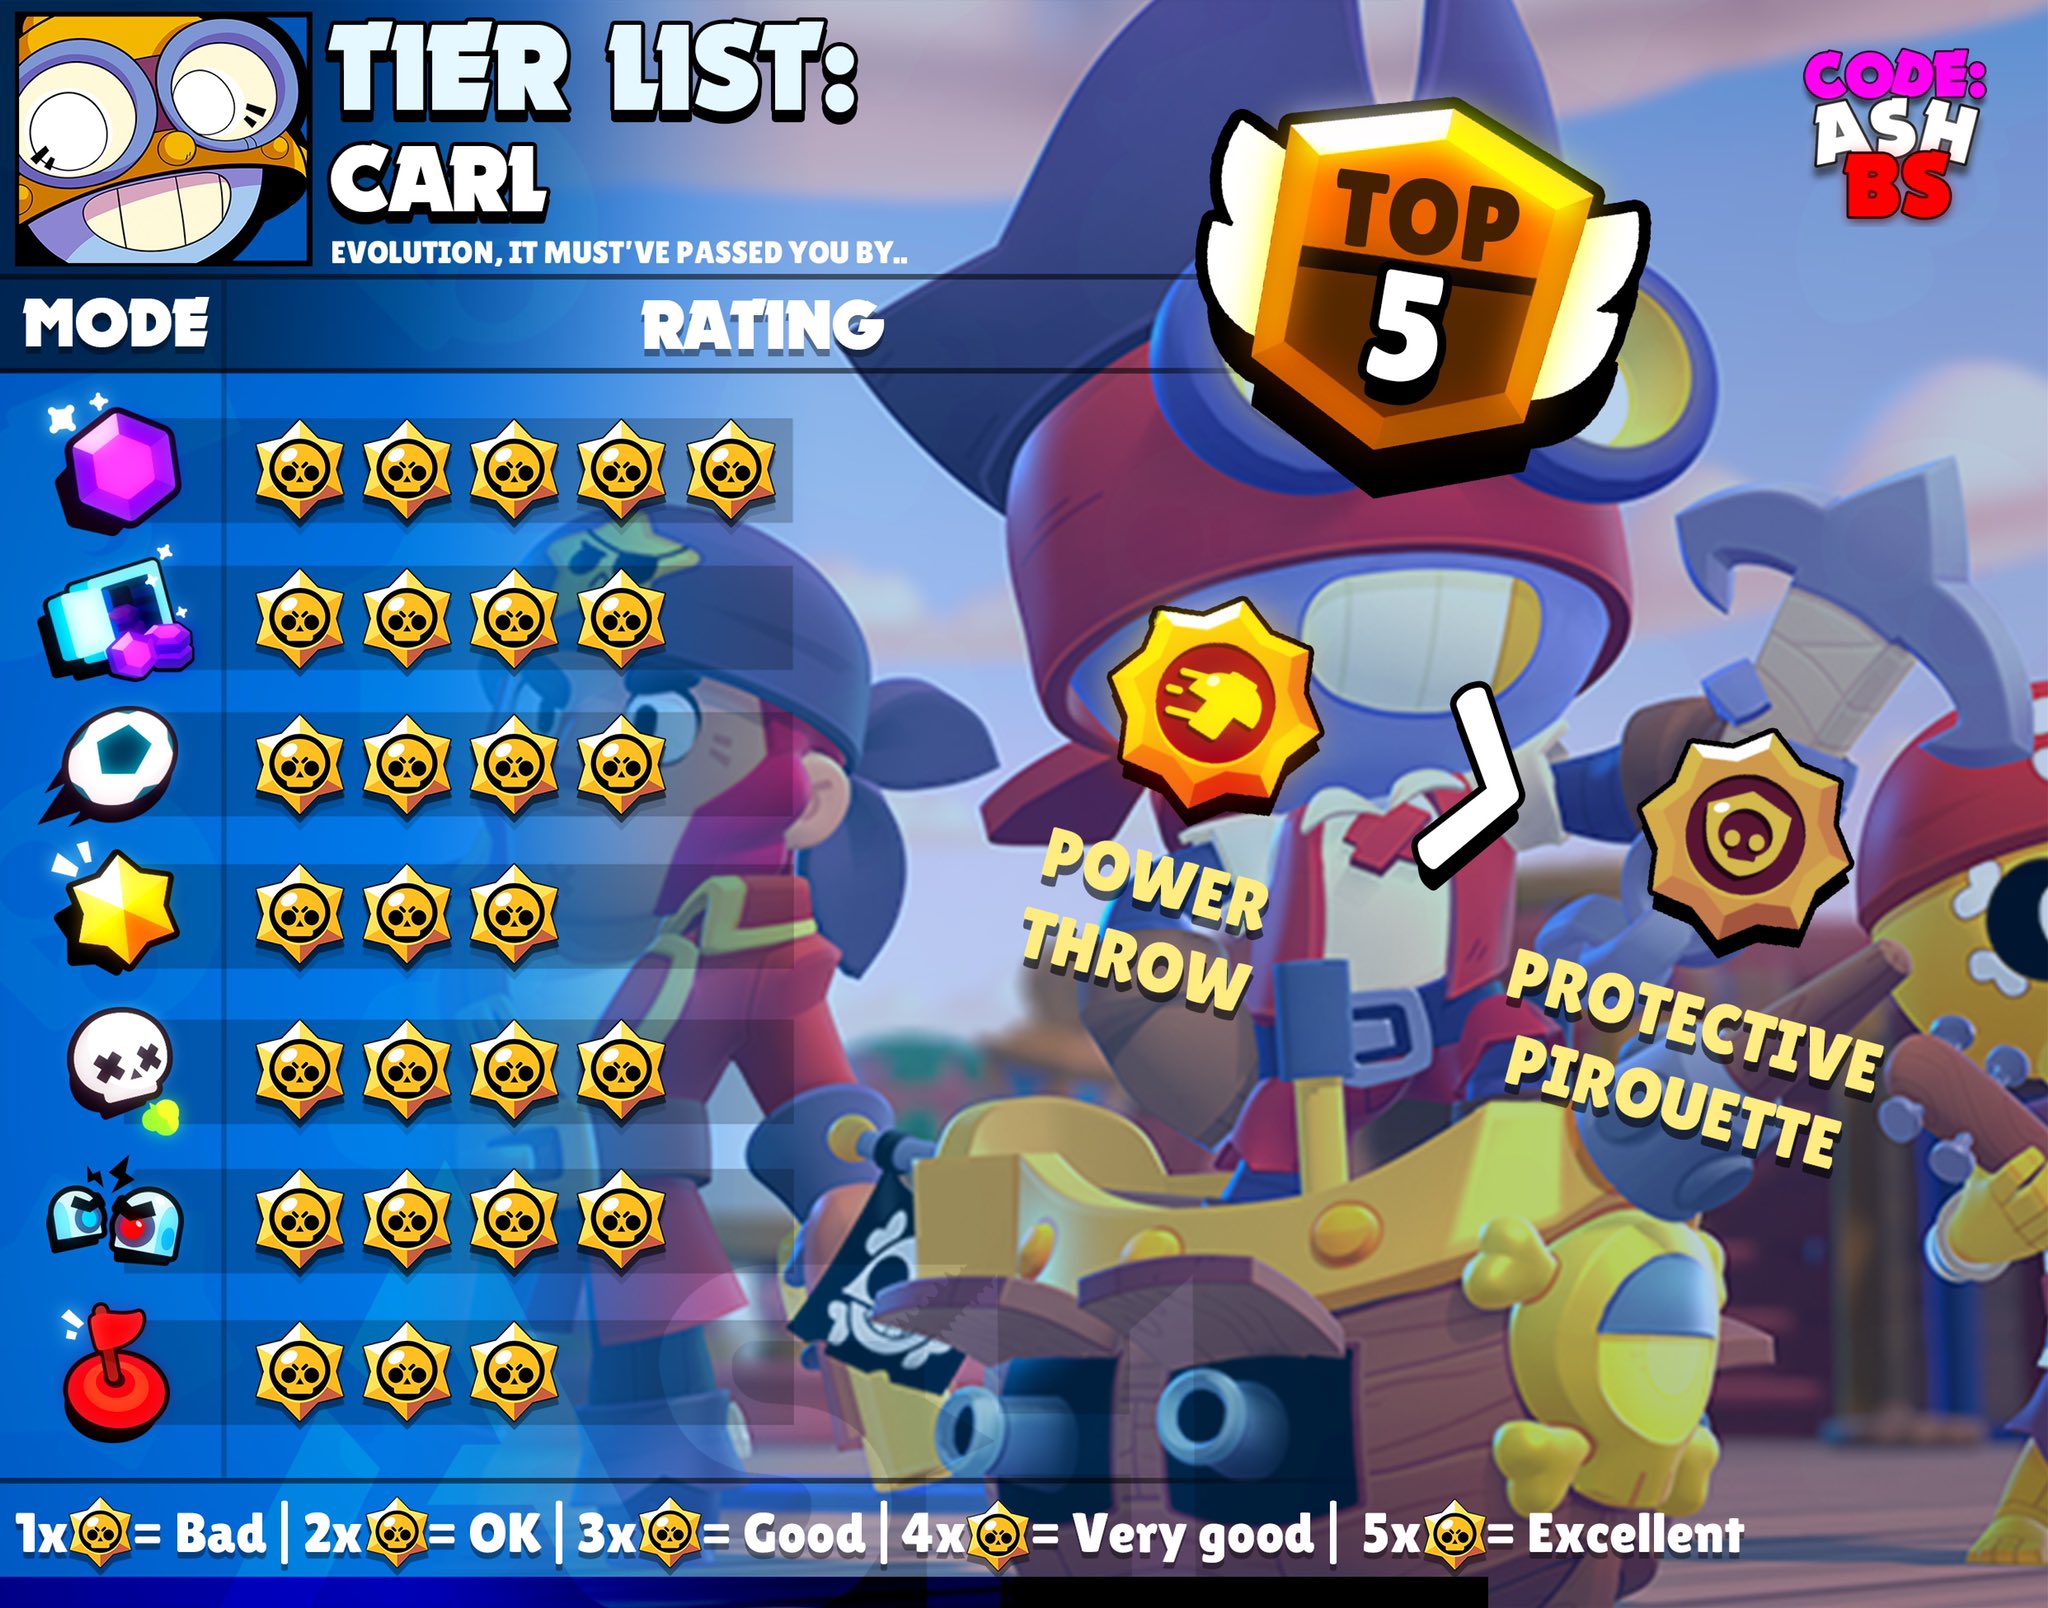 Code Ashbs On Twitter Carl Tier List For Every Game Mode Along With The Best Maps And Suggested Comps He S One Of The Best Brawlers In The Game Good Everywhere Carl Brawlstars - brawl stars evolution convite